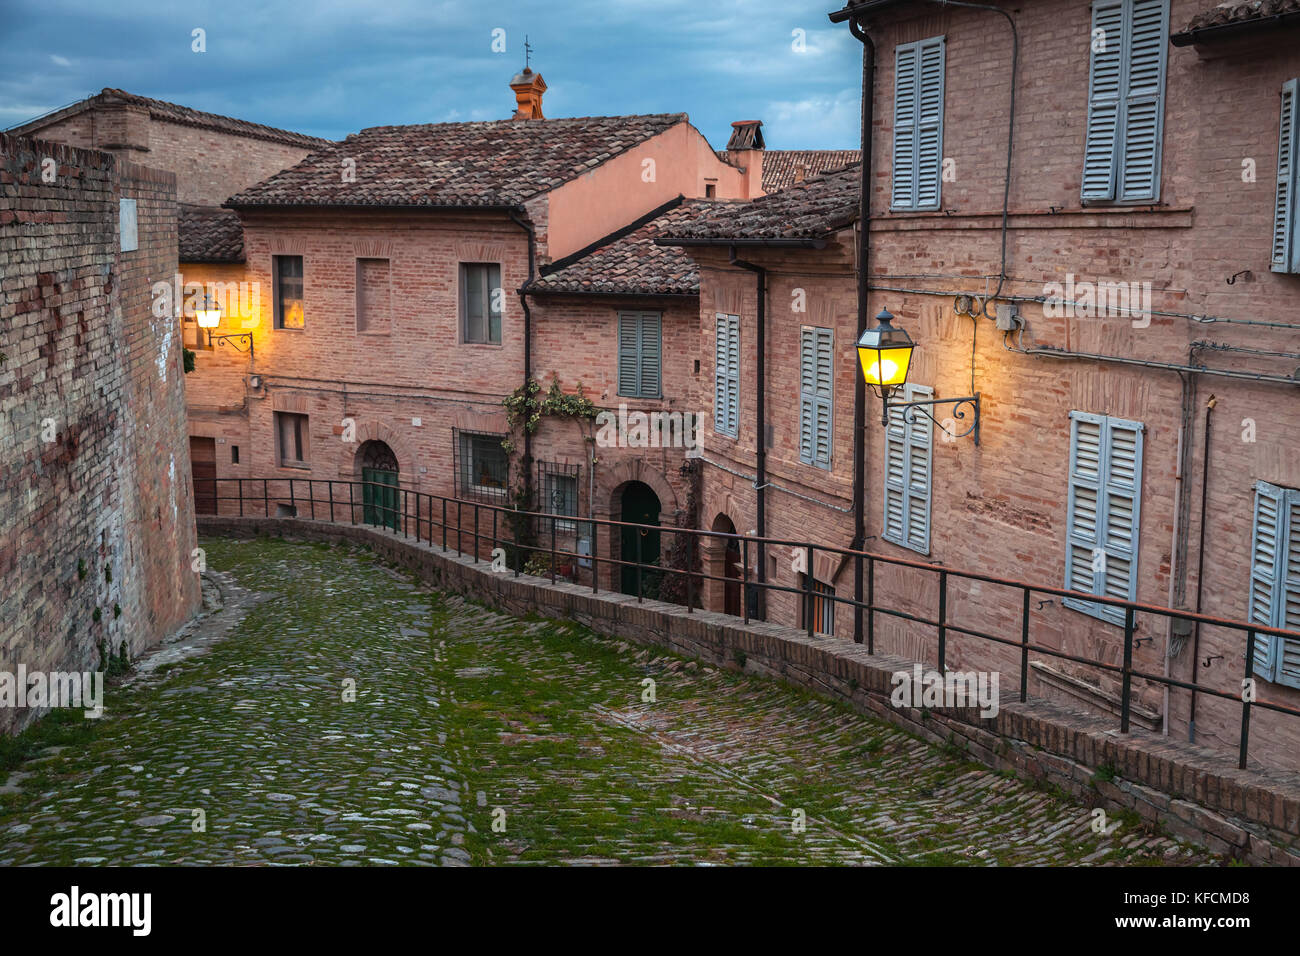 Evening street view with night illumination, Fermo old town, Italy Stock Photo